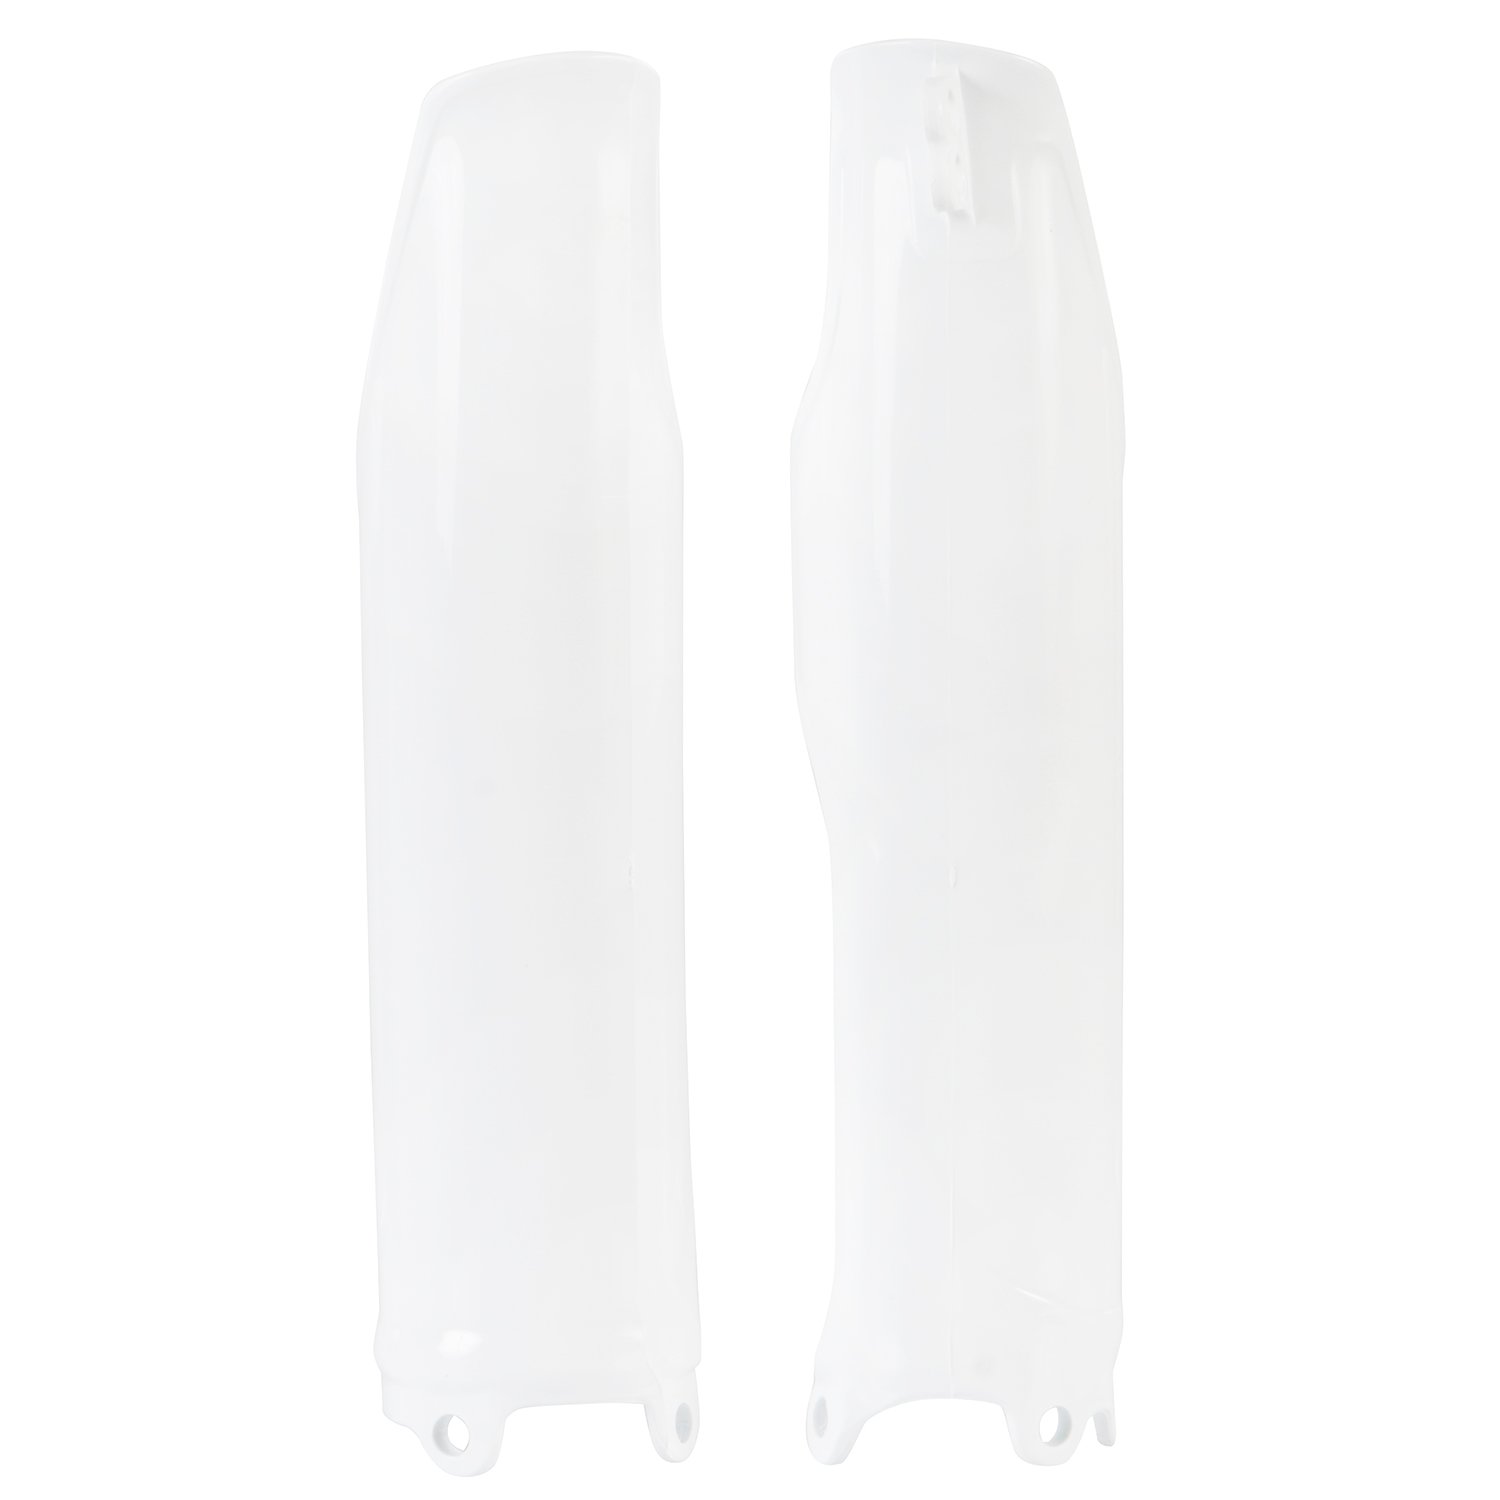 Acerbis Lower Fork Covers  Honda CRF 250 2018, CRF 450 17-18, White